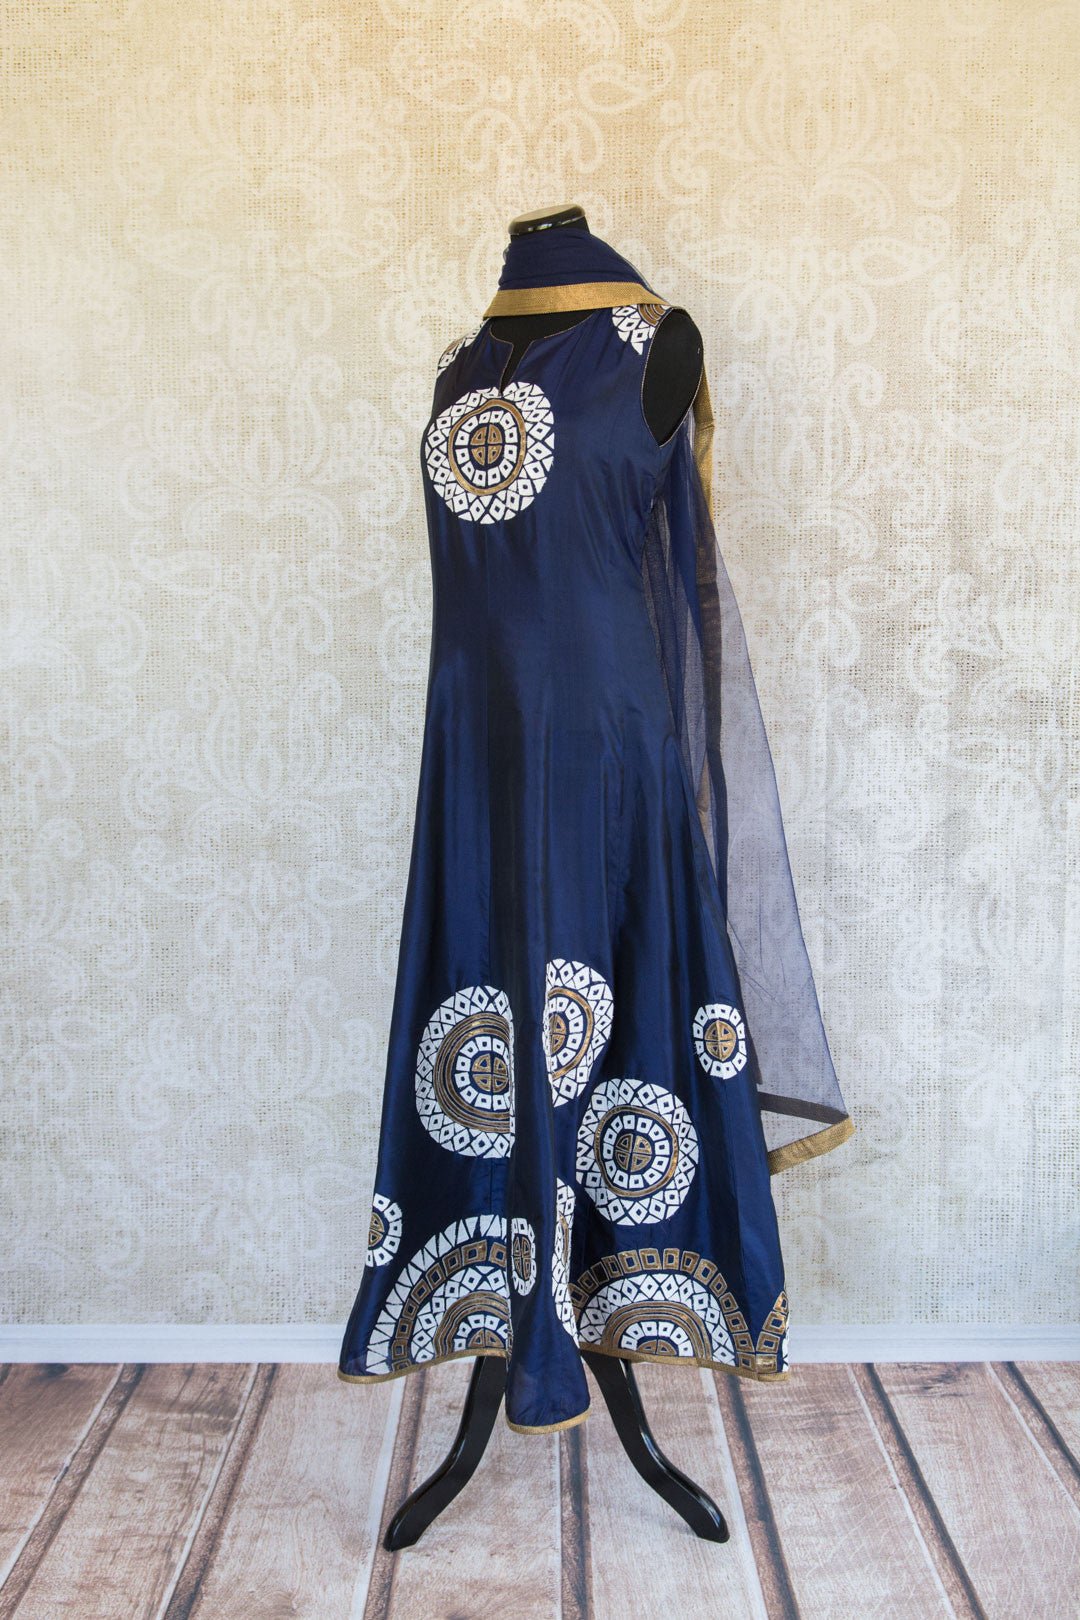 501087-suit-sleeveless-dark-blue-white-gold-circles-embroidered-scarf-alternate-view-2